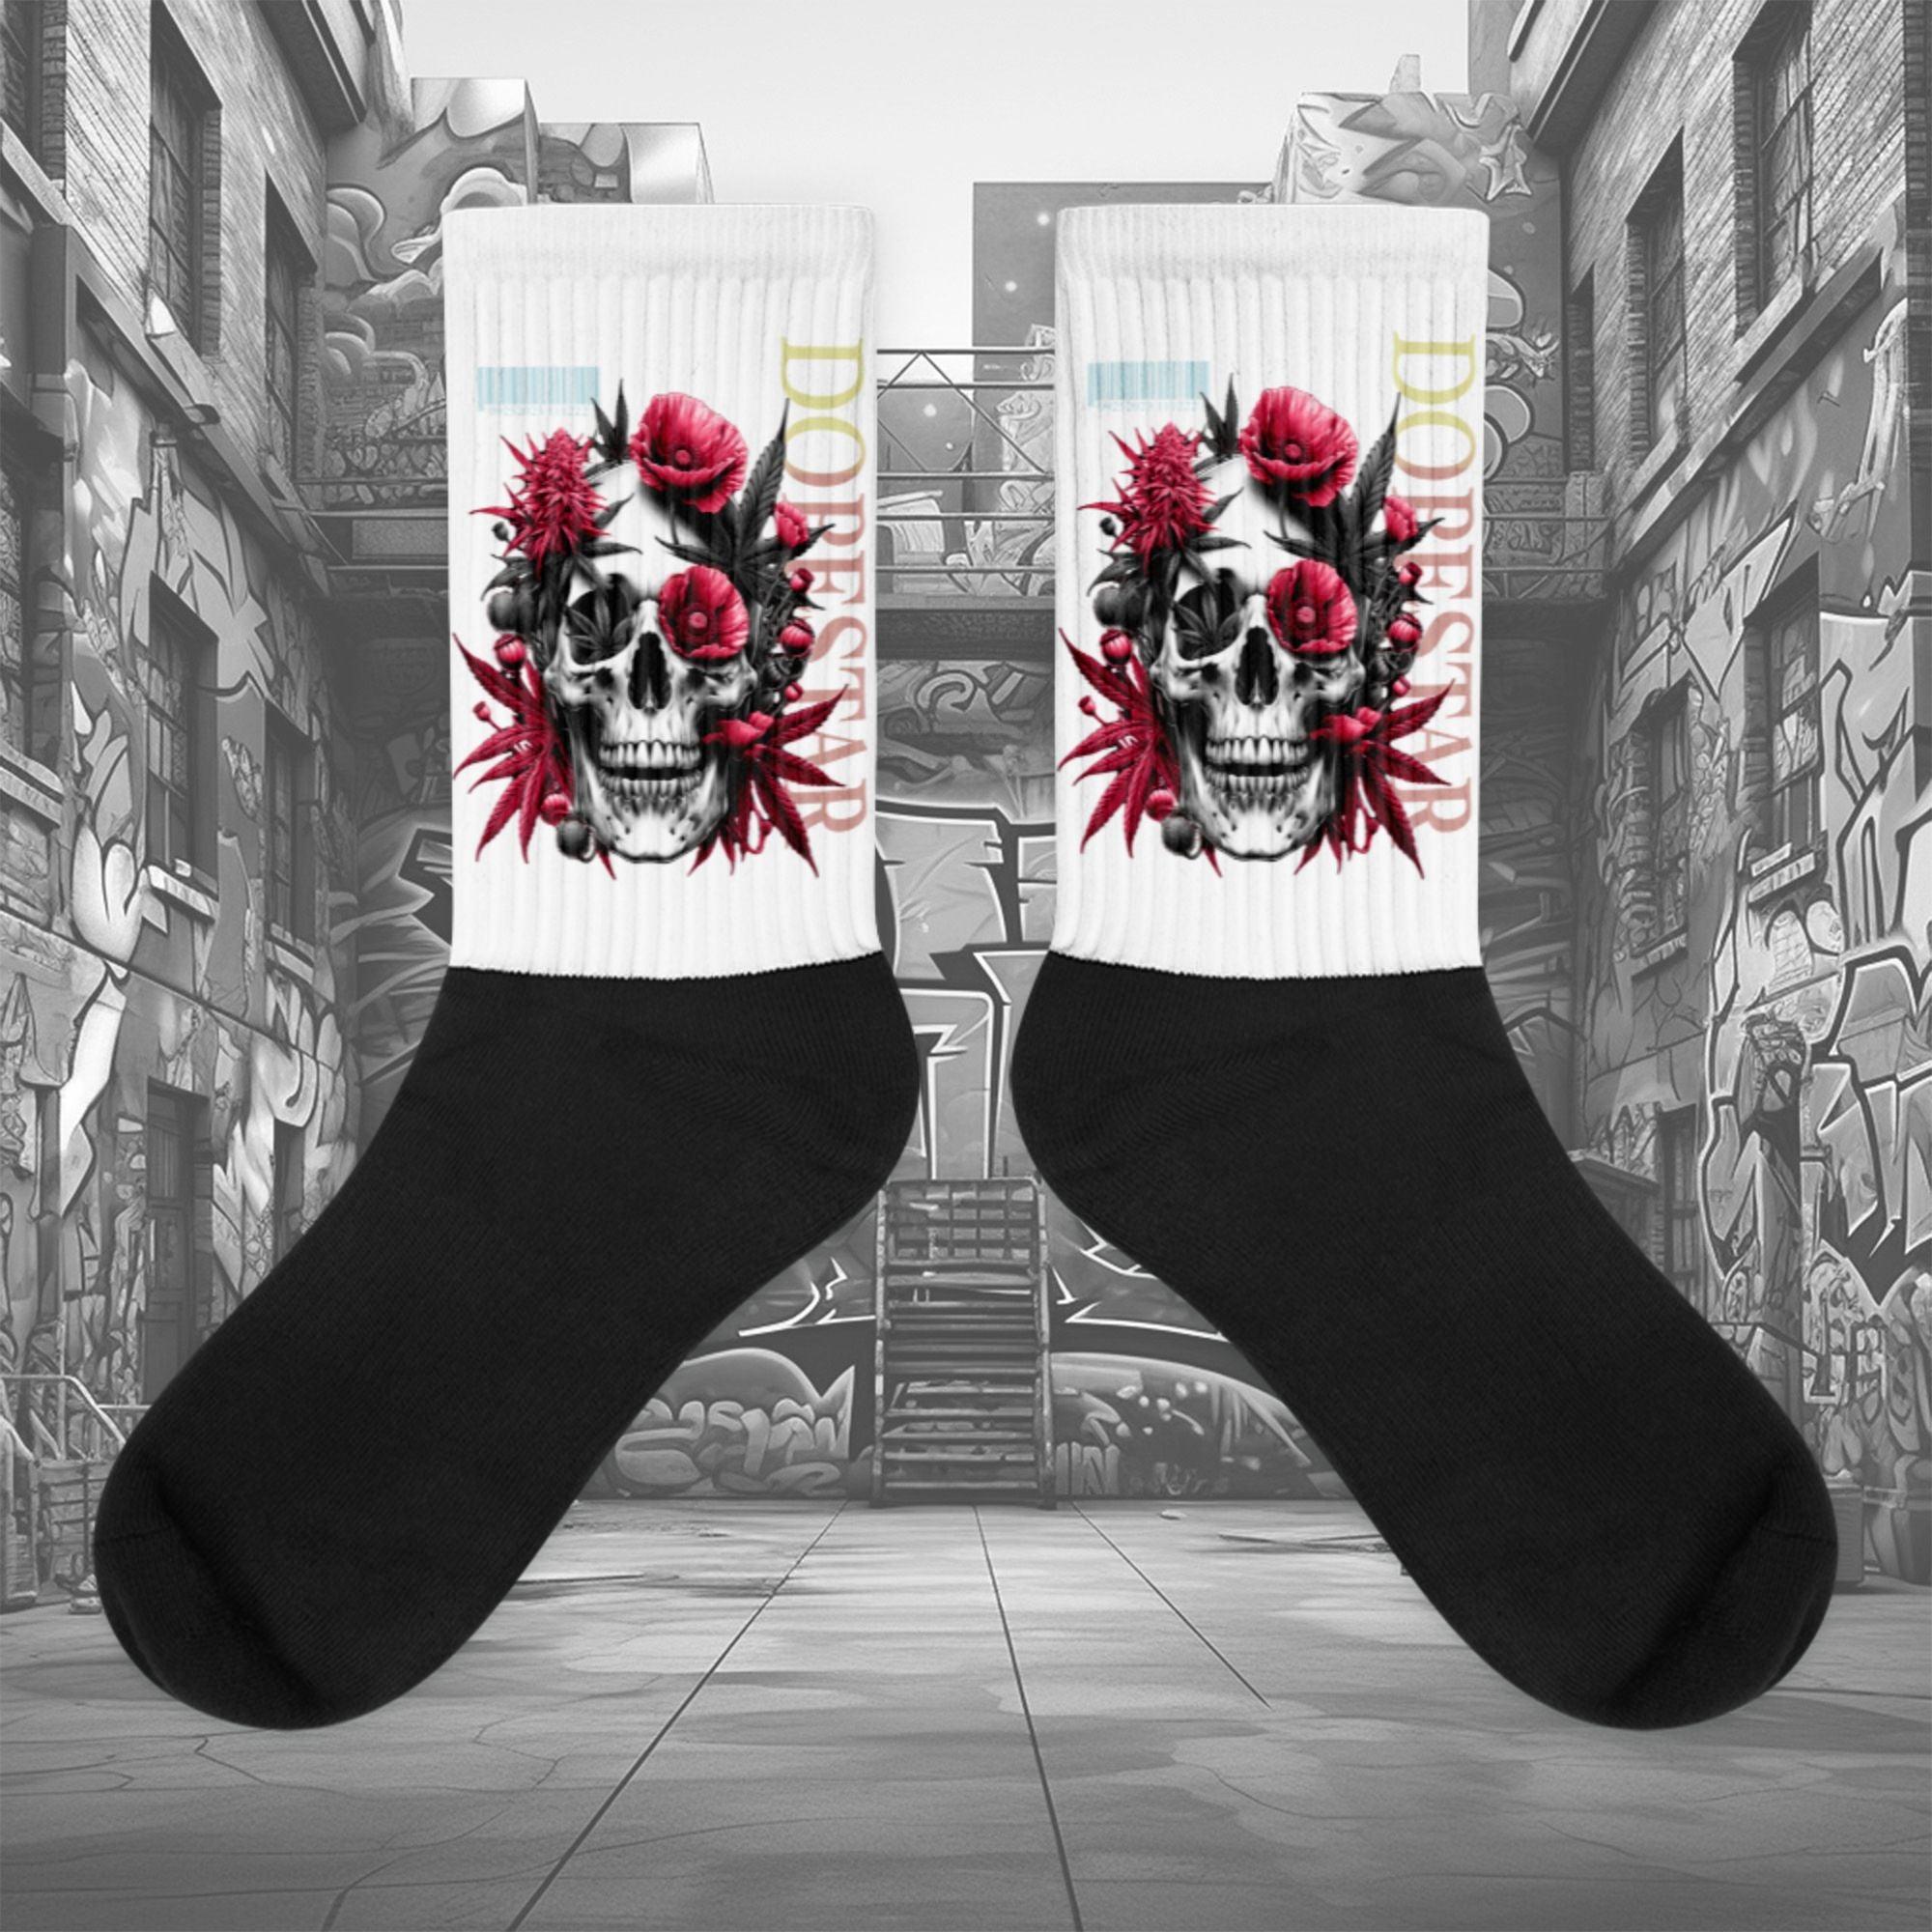  Showcases the view of the socks, highlighting the vibrant 'Skull Cannabis Poppies' design, which perfectly complements the Air Jordan 1 Retro High OG Next Chapter Spider-Verse sneakers. The intricate pattern and color scheme inspired by the Spider-Verse theme are prominently displayed.  Focusing on the ribbed leg , cusioned bottoms and the snug fit of the socks. This angle provides a clear view of the texture and quality of the material blend.